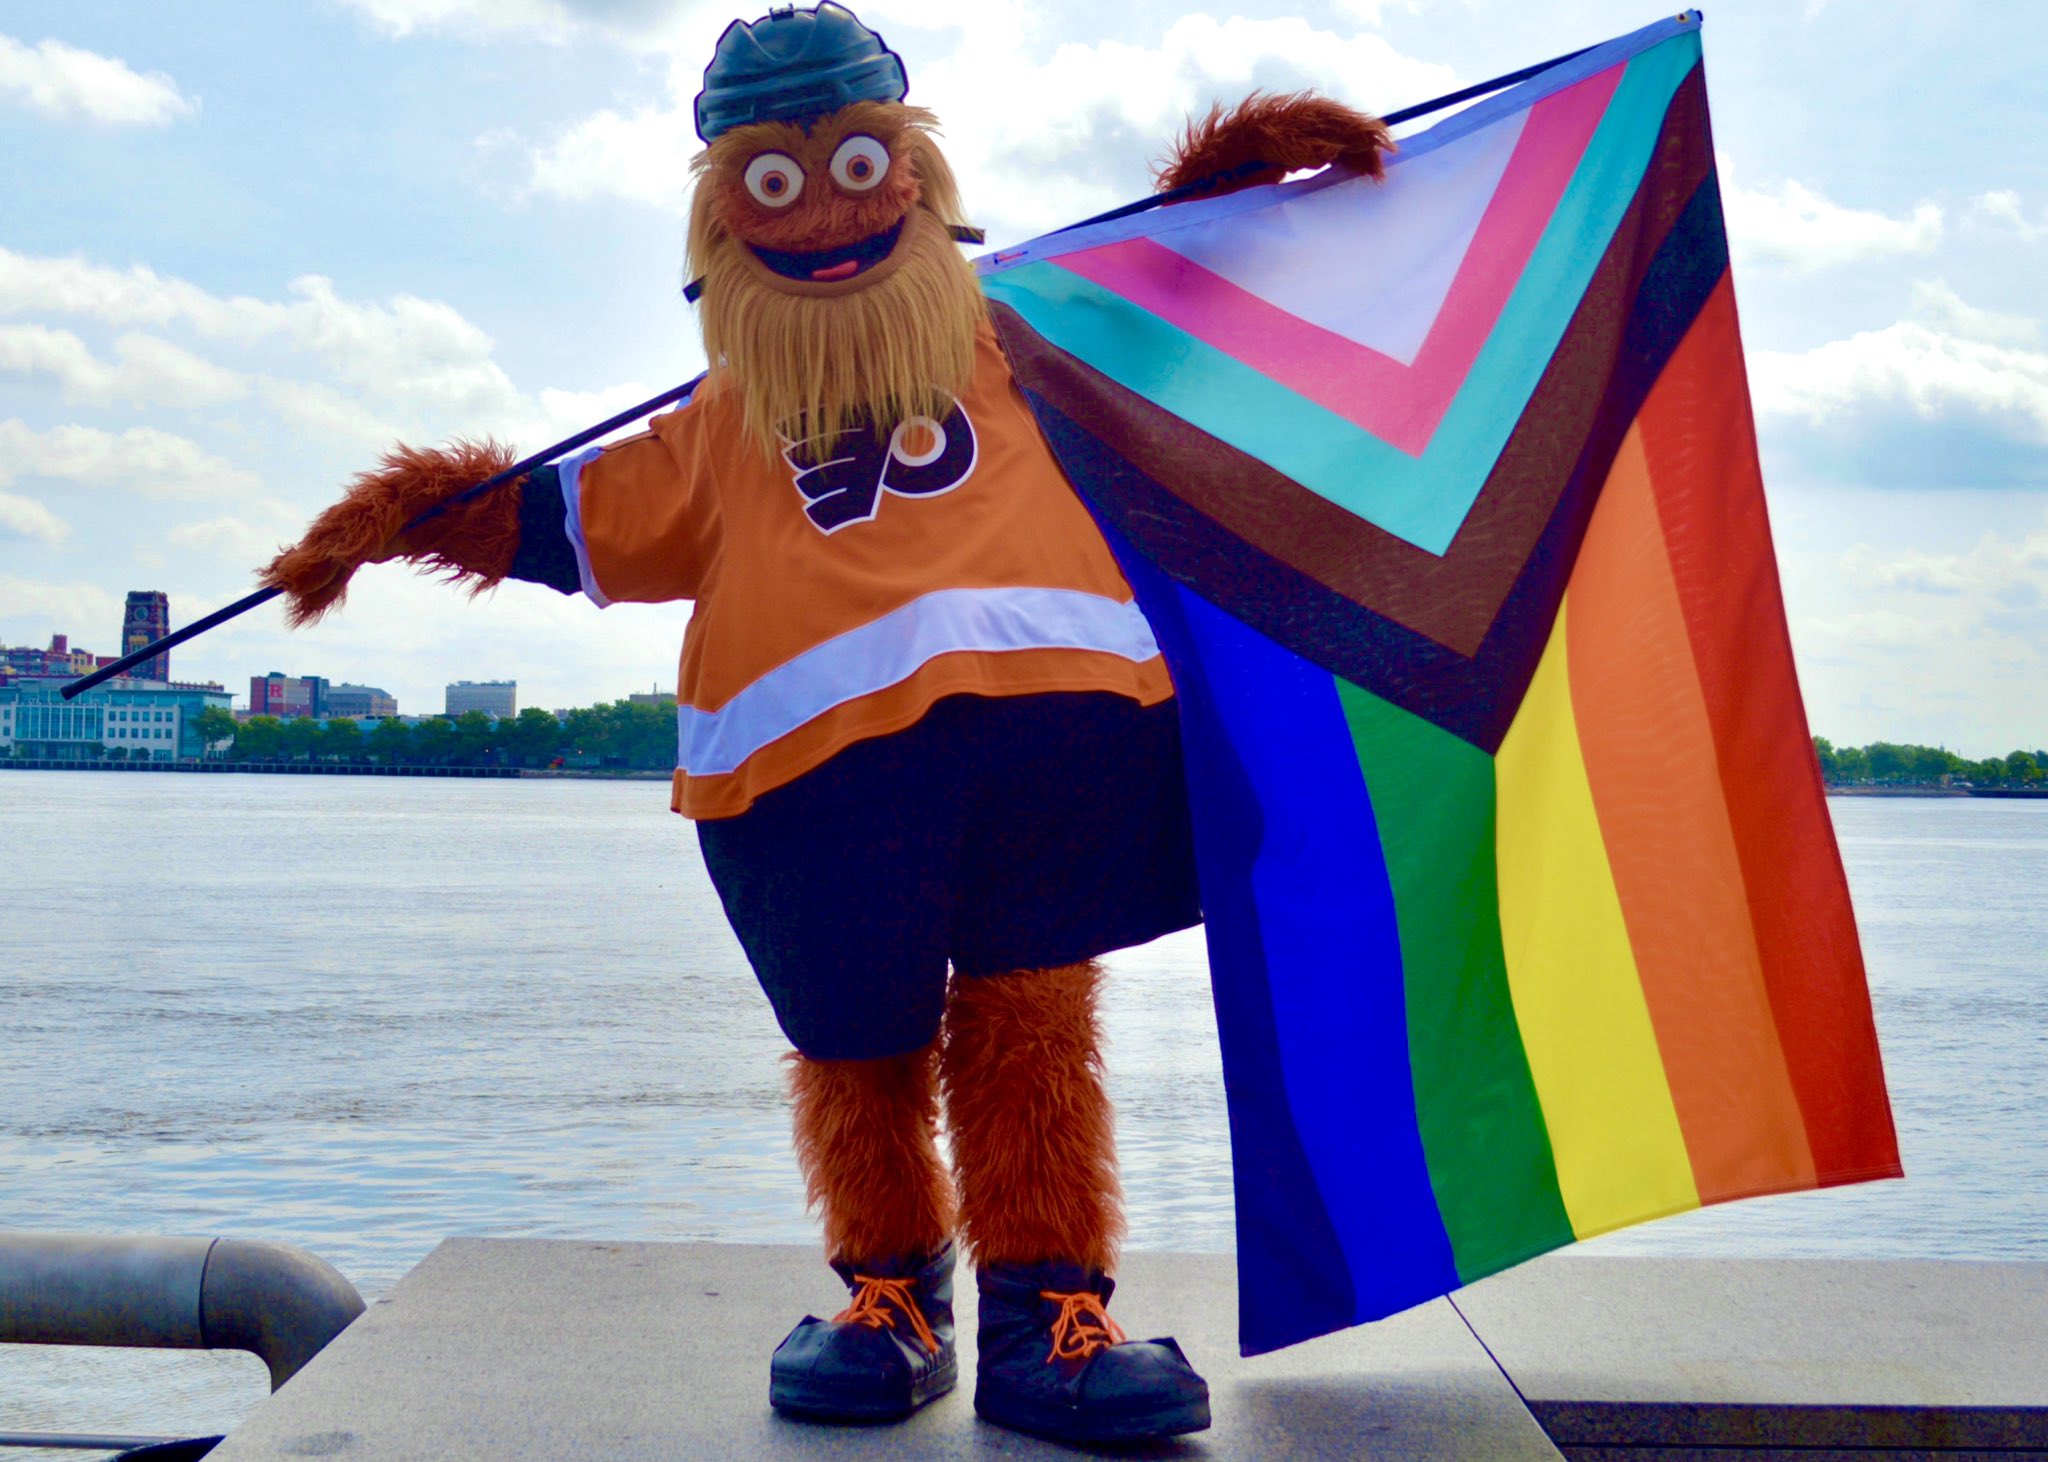 Gritty on Twitter: "liv laff LUV https://t.co/x42VSYVUoH" / X